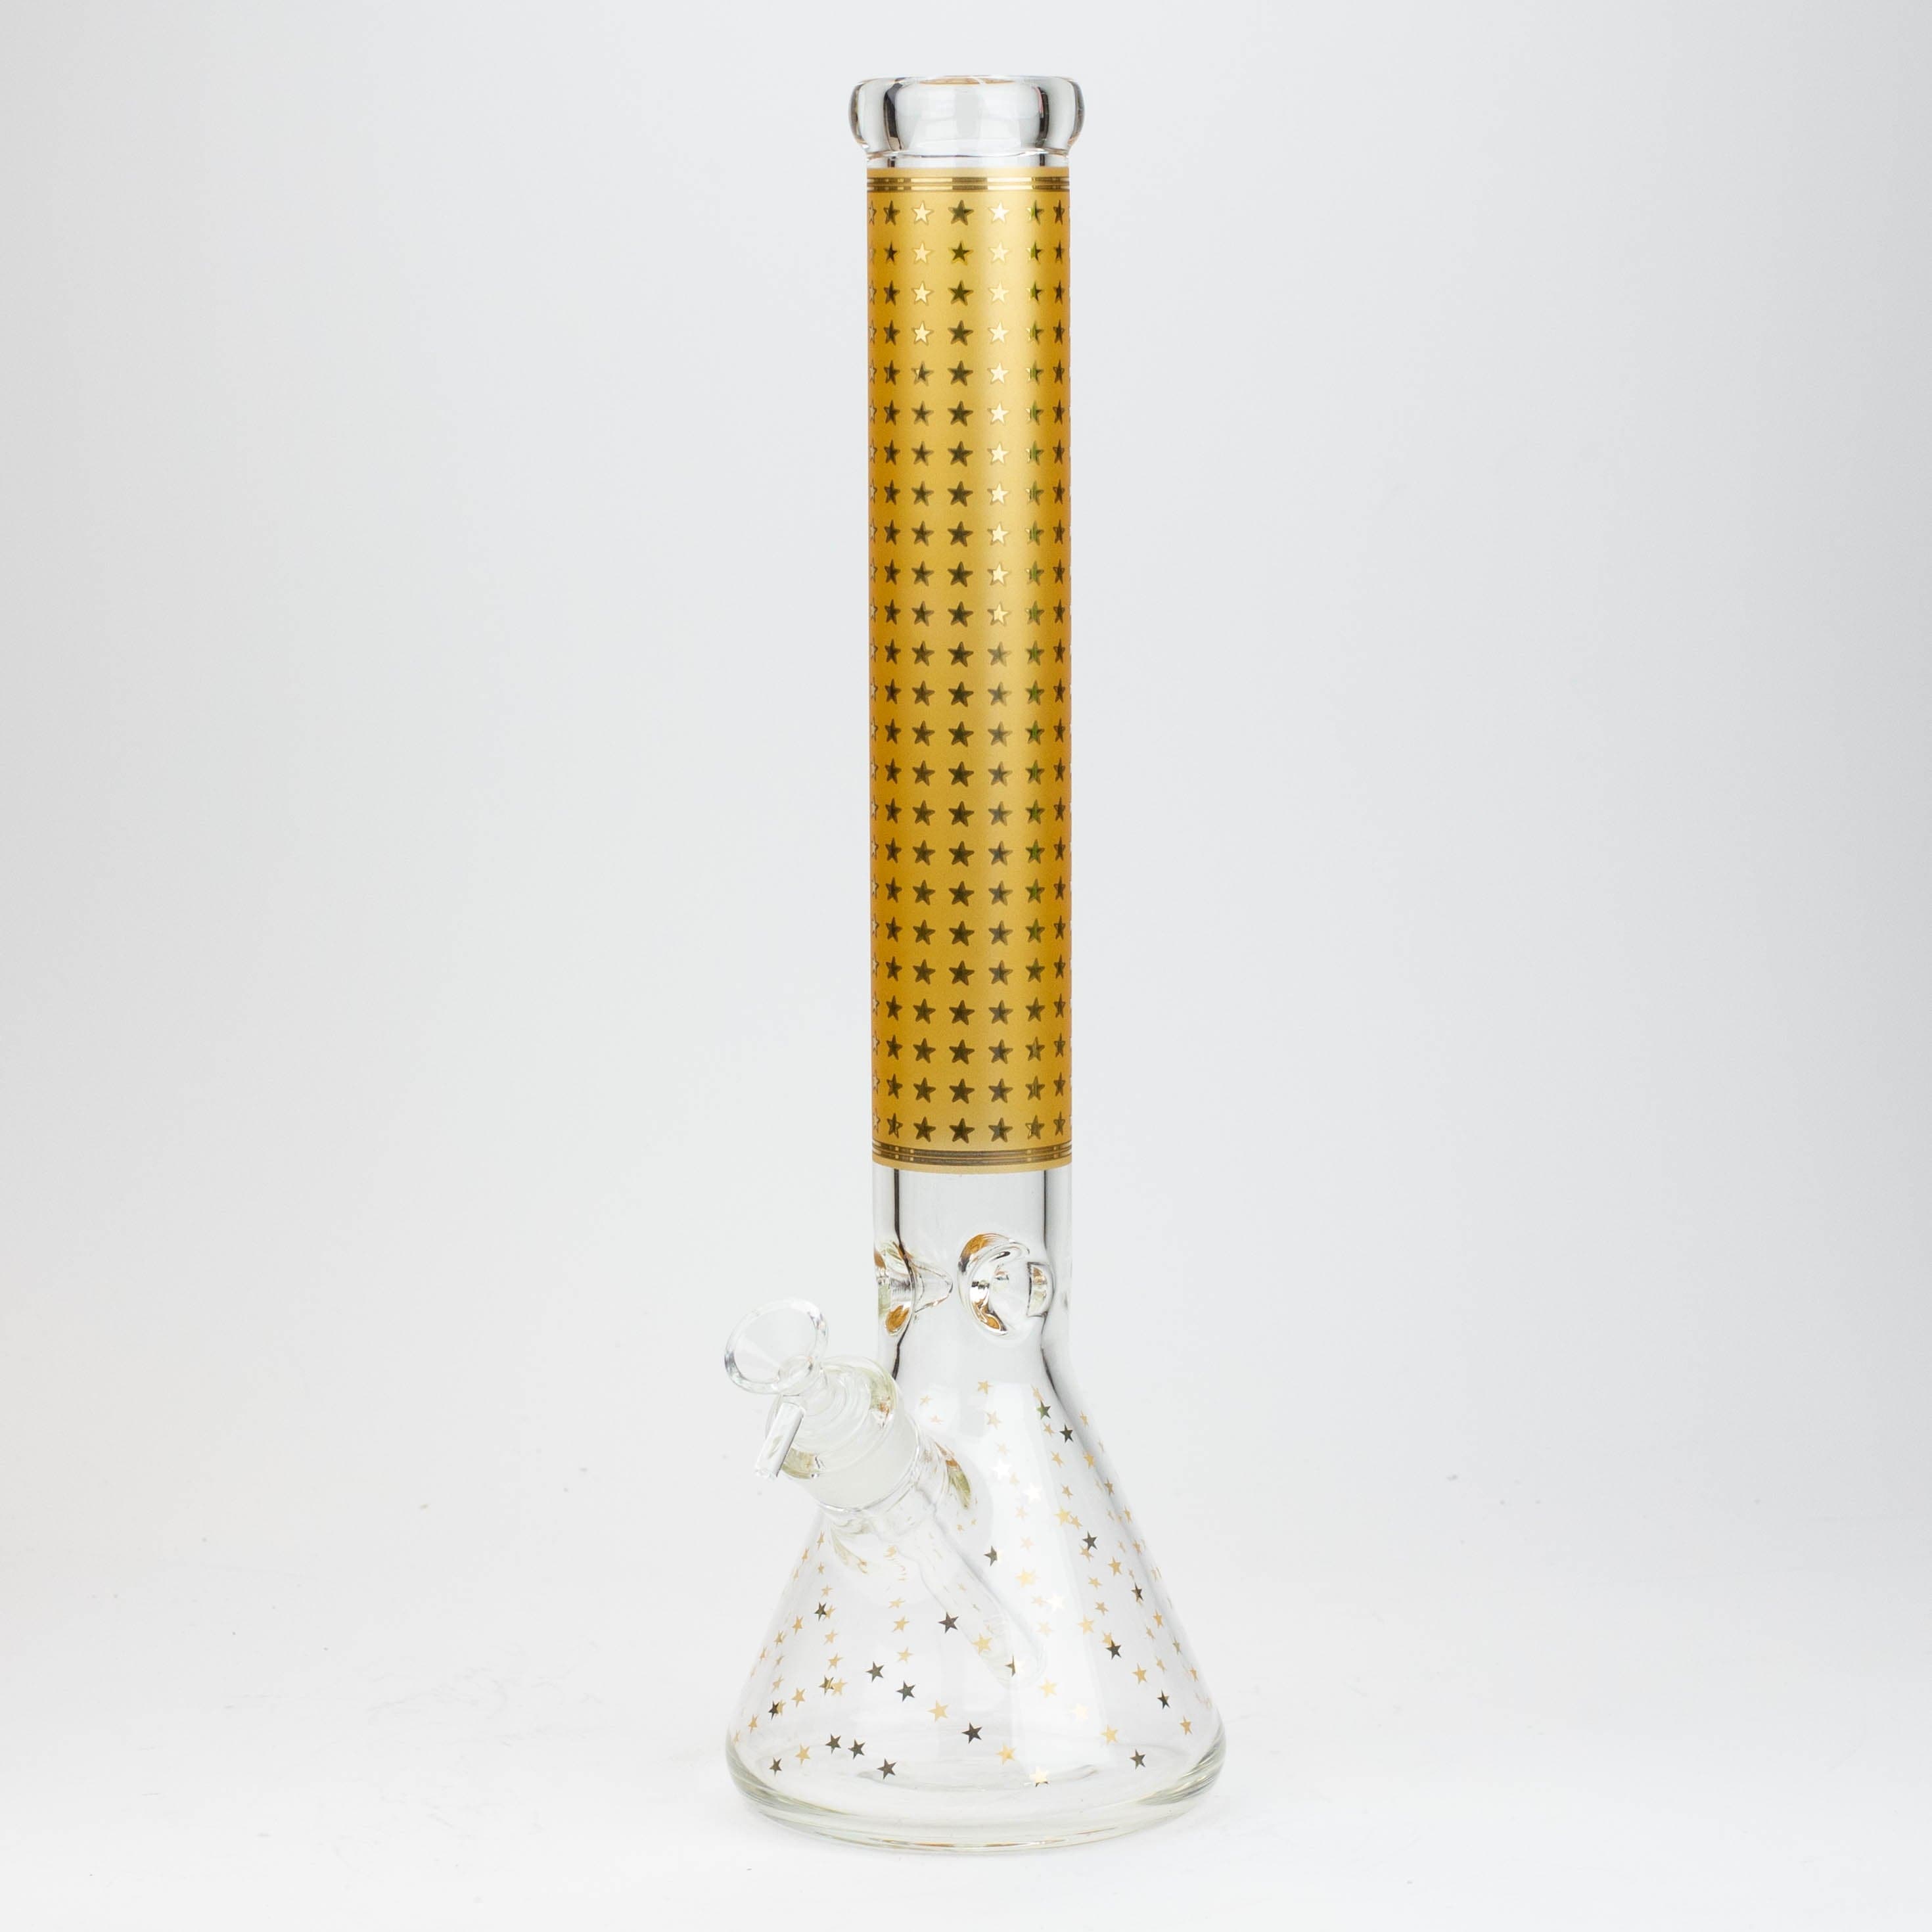 Star 7 mm glass water pipes 17.5"_11